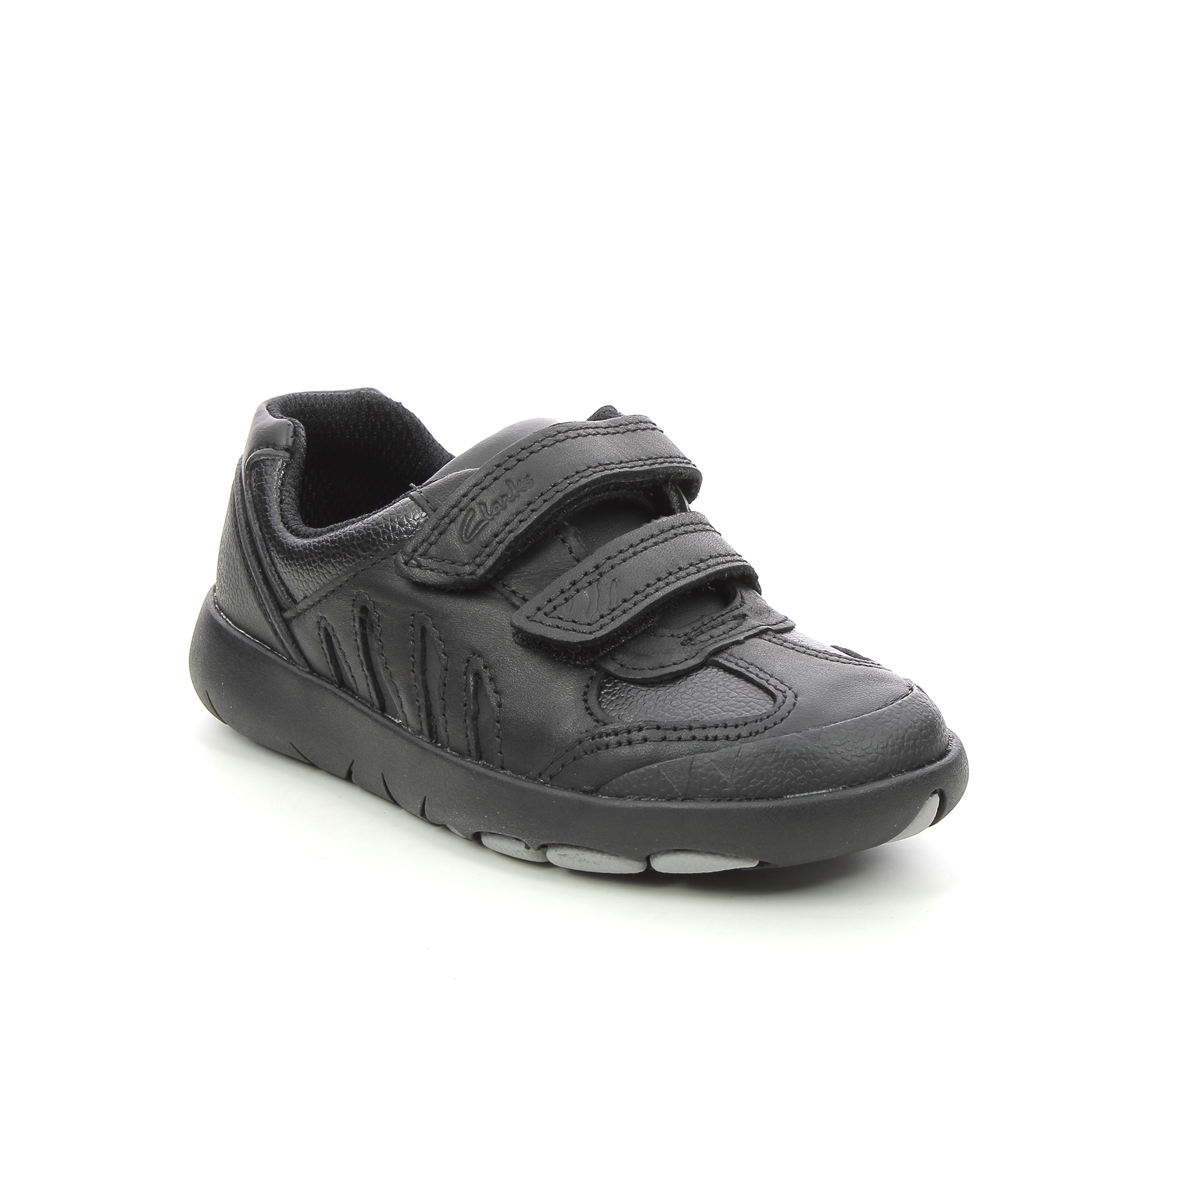 Clarks Rex Stride T Black Leather Kids Boys Casual Shoes 614397G In Size 9.5 In Plain Black Leather G Width Fitting For School For kids